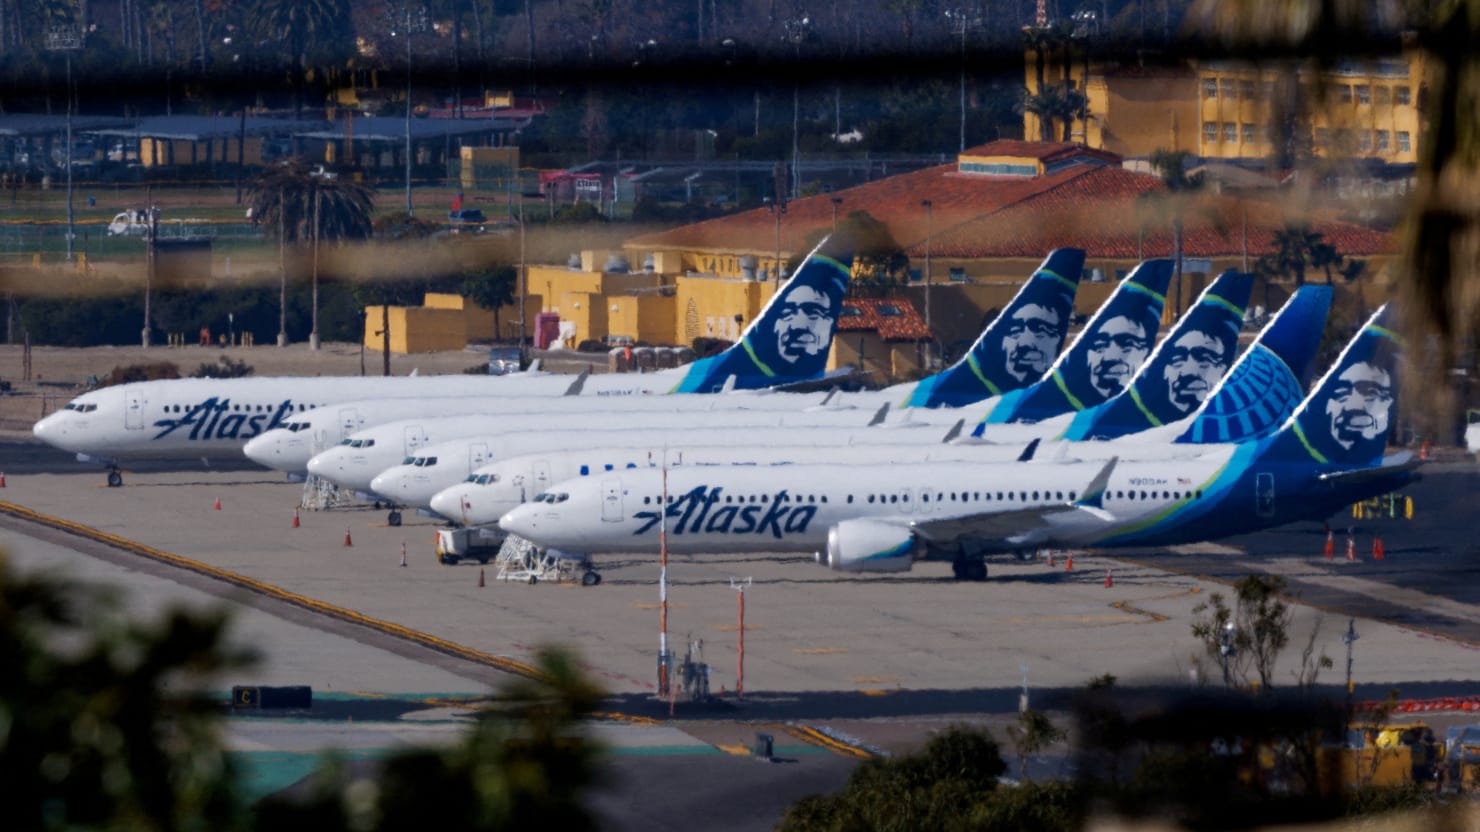 Alaska Airlines Flight Declares Emergency After Passengers Smell Fumes in Cabin